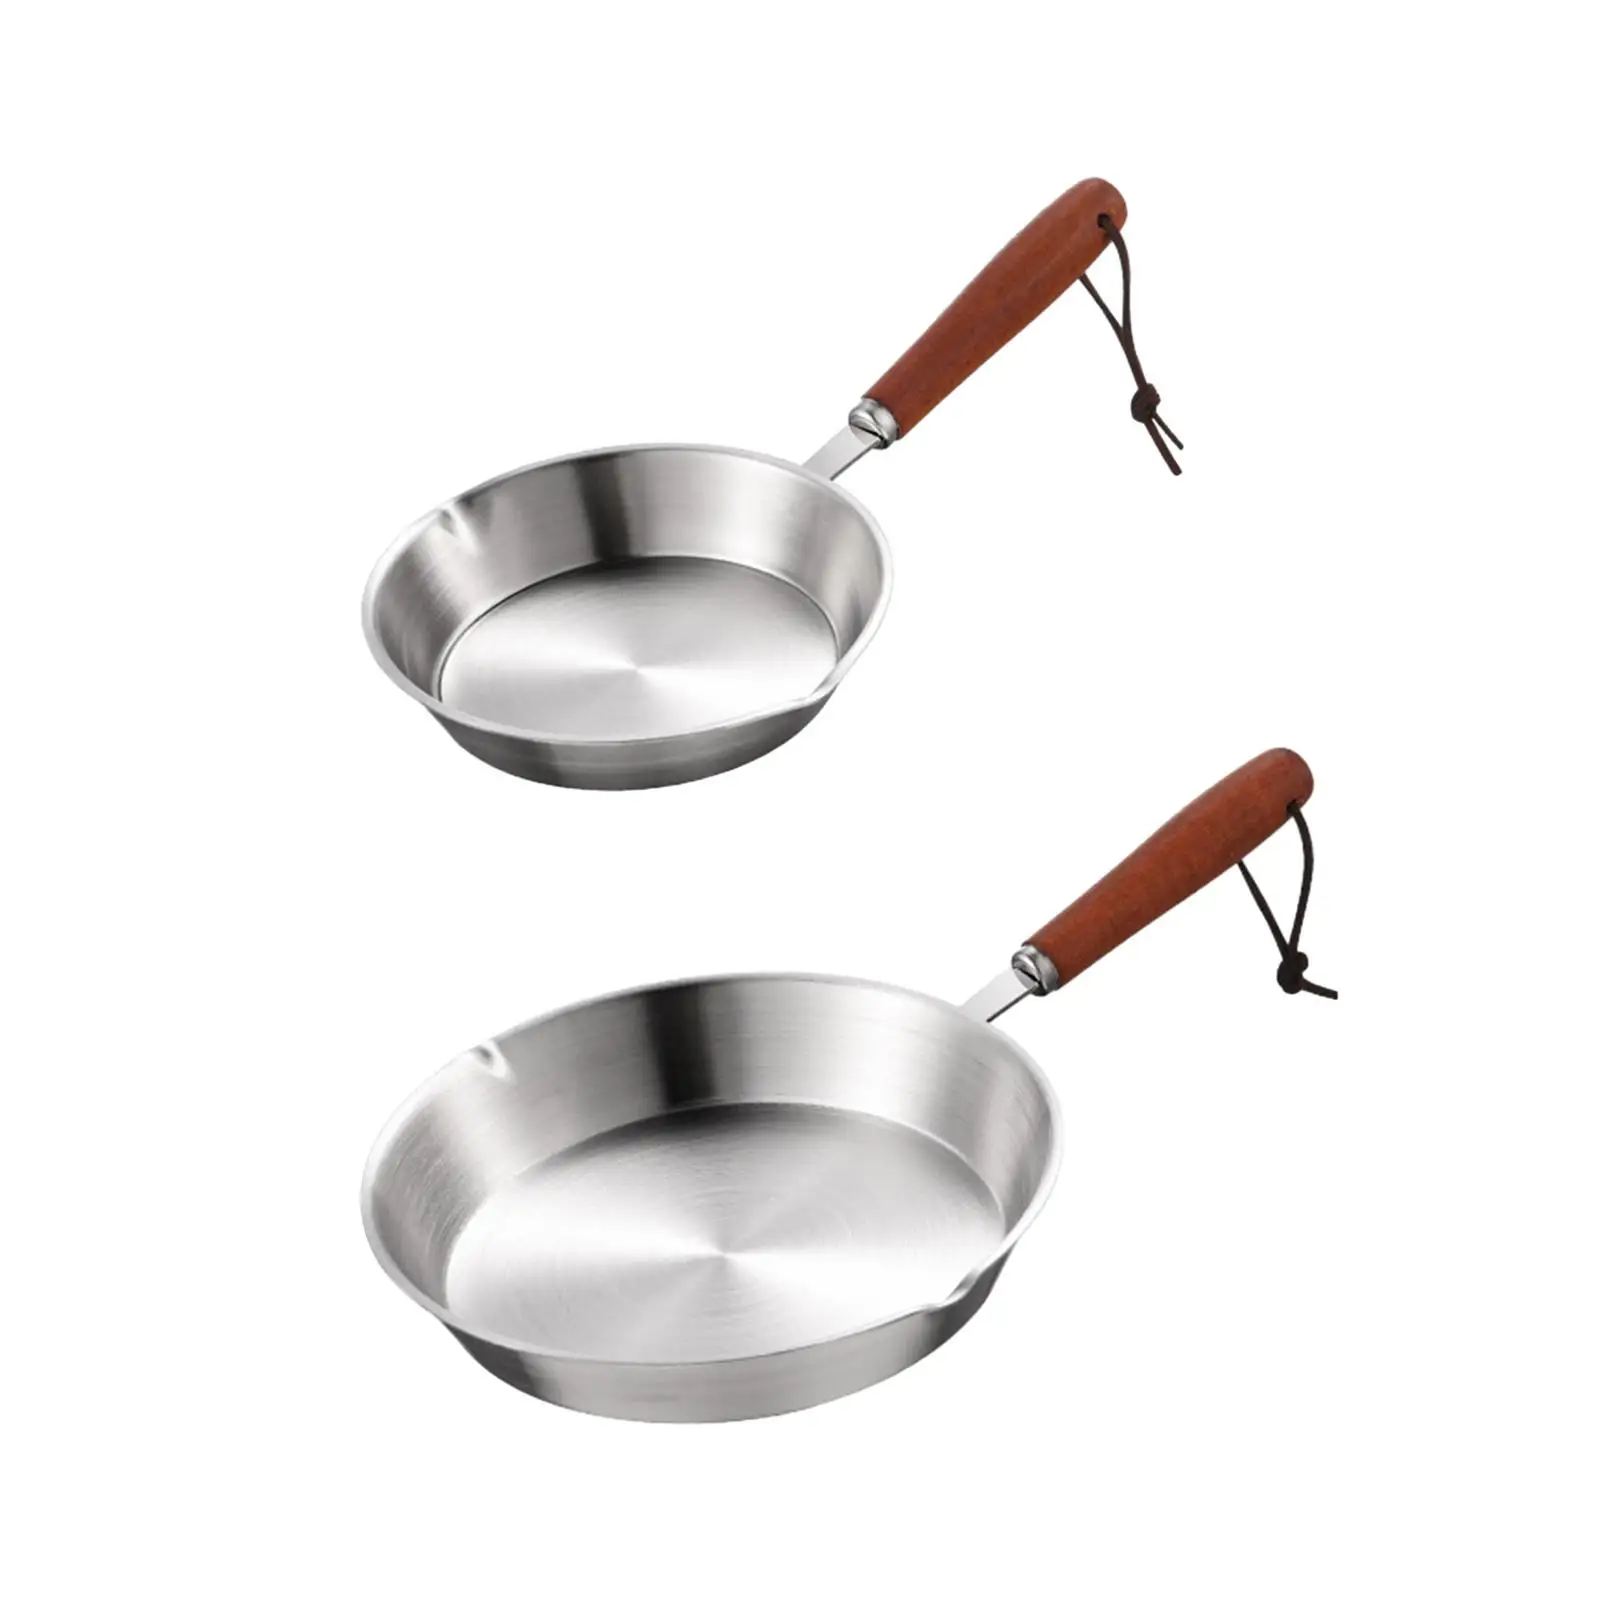 Kitchen Stainless Steel Fry Pan with Dual Spout Ergonomic Handle Kitchen Cookware Omelette Pan Deep Frying Pan Skillet for Rvs